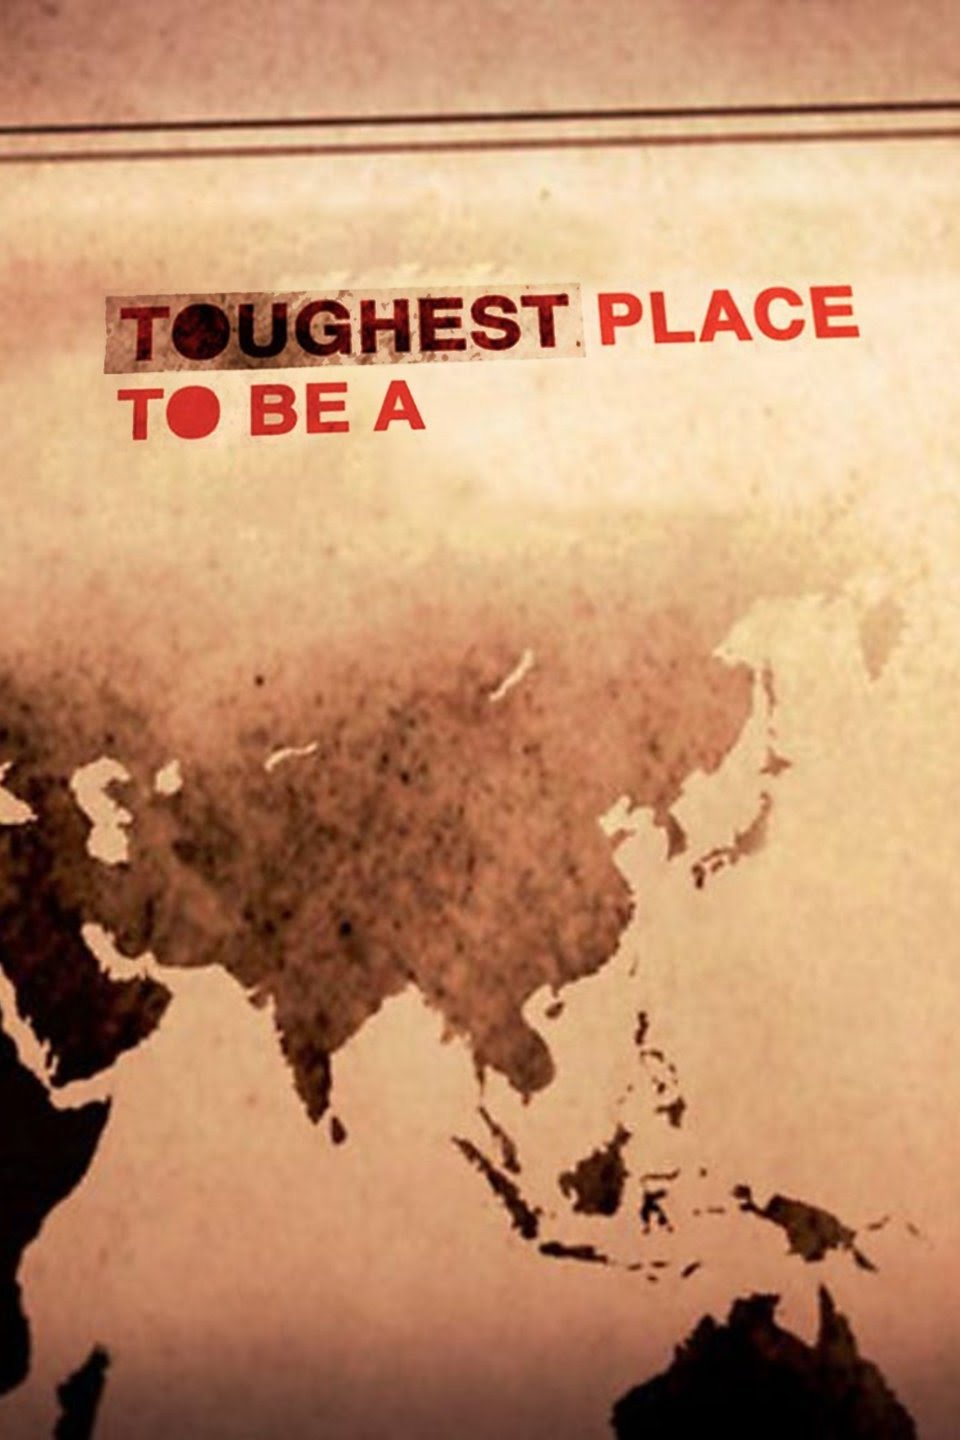 Toughest Place to be a...